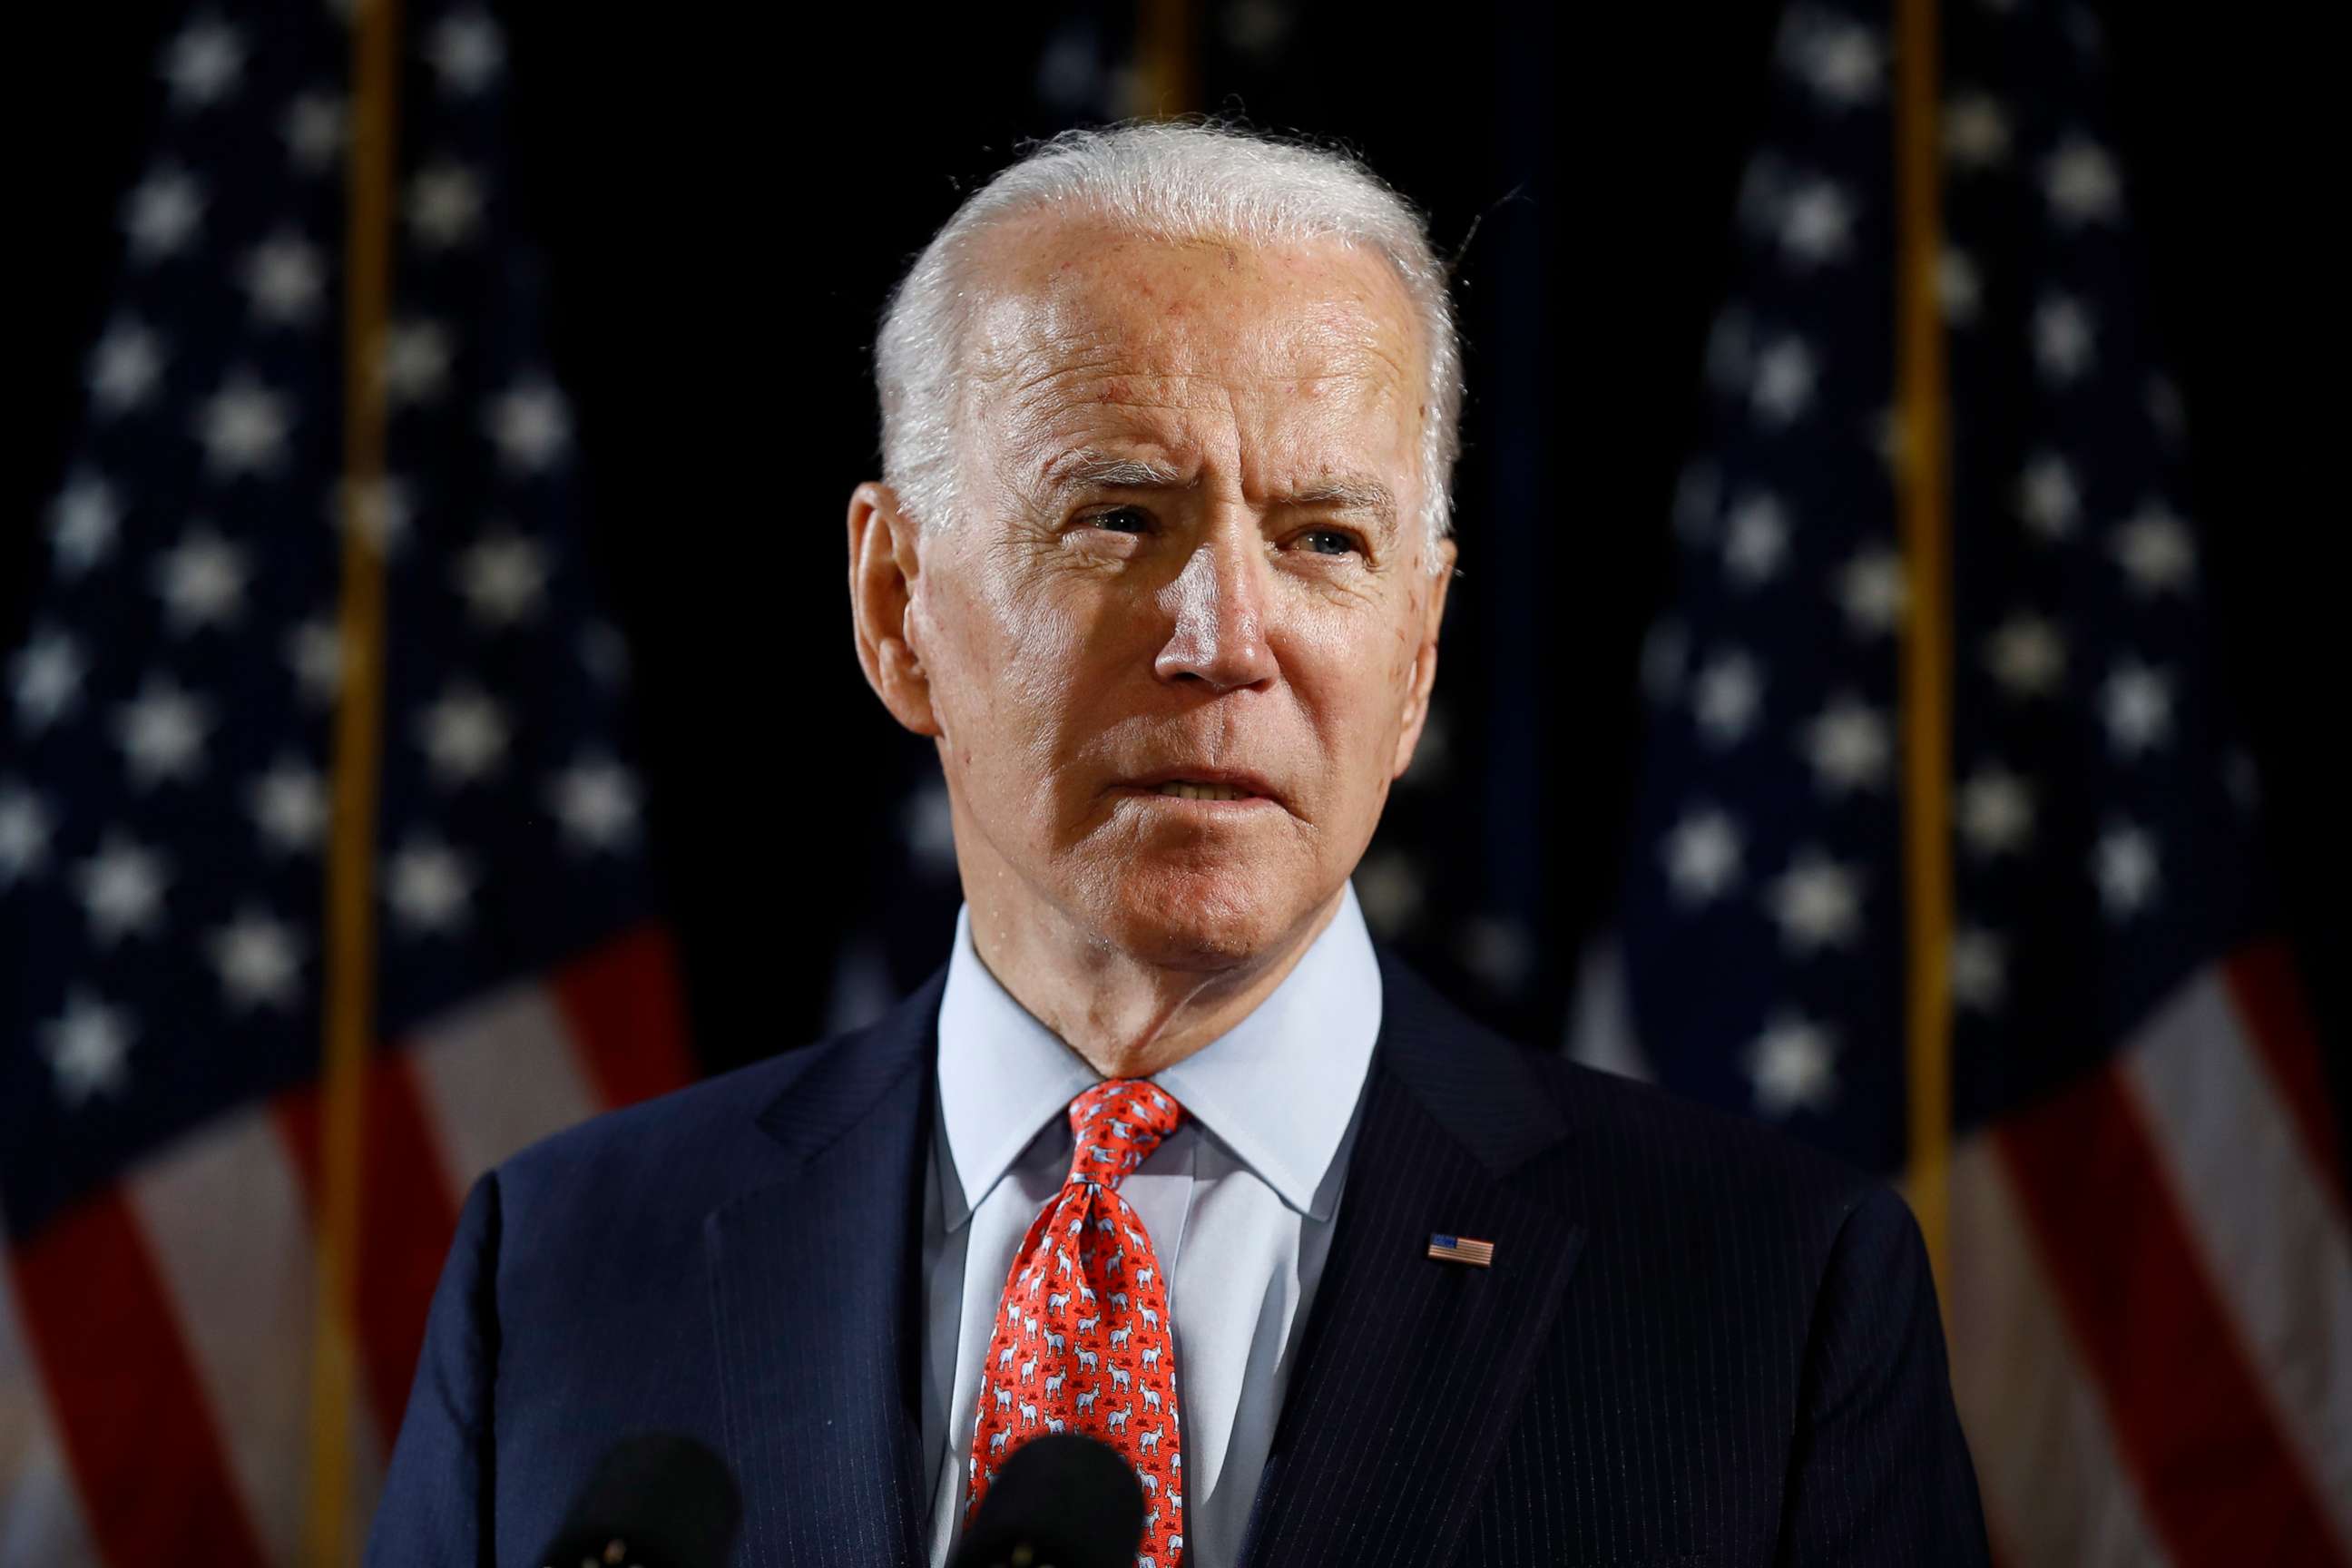 PHOTO: In this March 12, 2020, file photo Democratic presidential candidate former Vice President Joe Biden speaks about the coronavirus in Wilmington, Del.